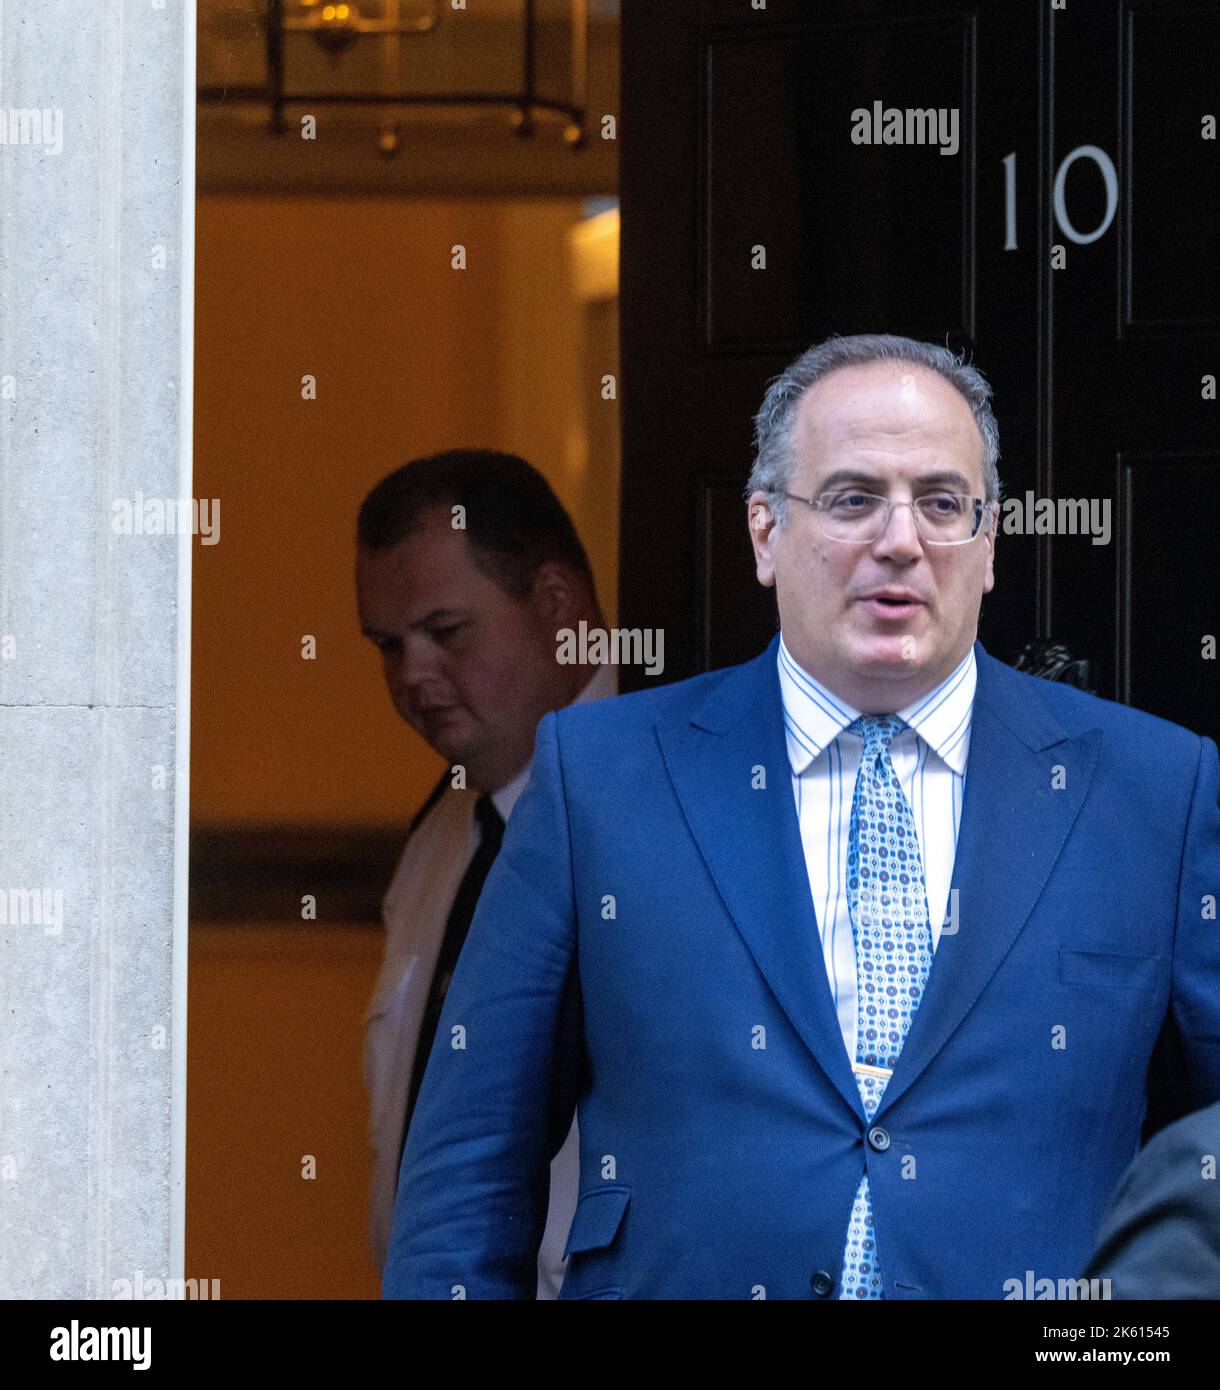 London, UK. 11th Oct, 2022. Michael Ellis, Attorney General leaves a cabinet meeting at 10 Downing Street London. Credit: Ian Davidson/Alamy Live News Stock Photo